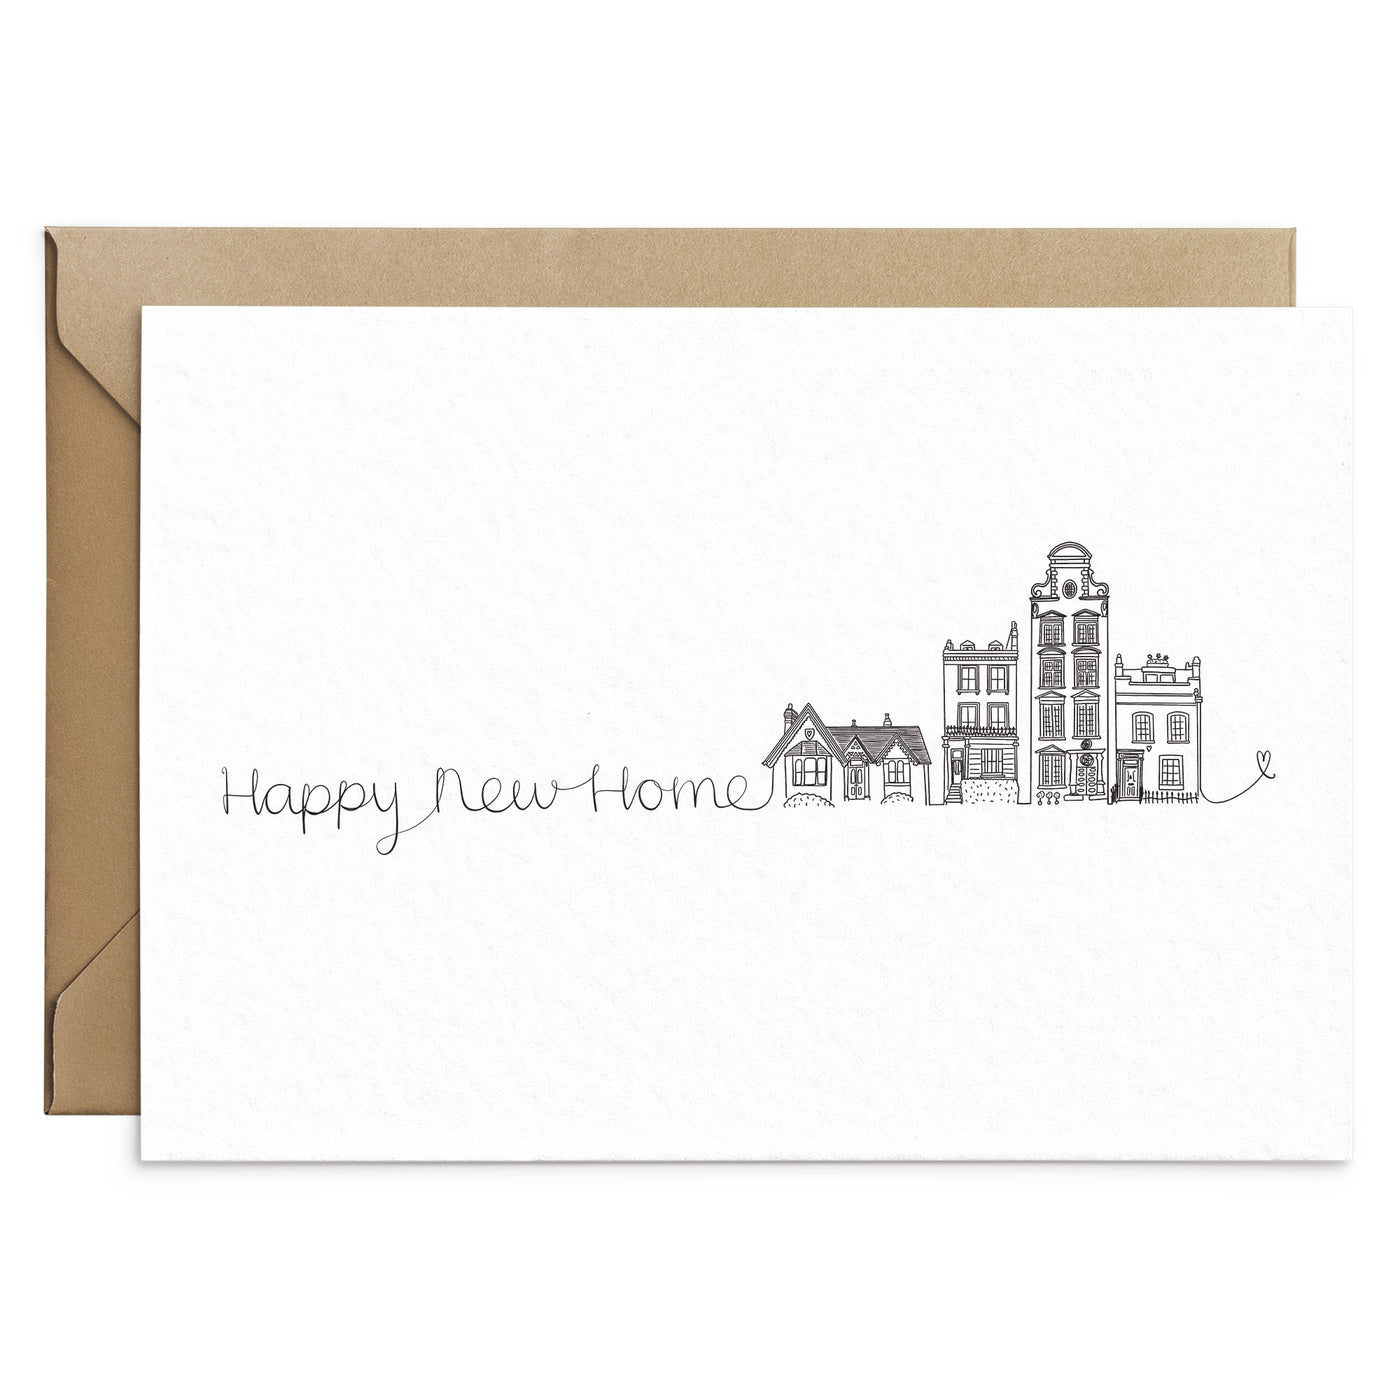 Happy New Home Card - Poppins & Co.